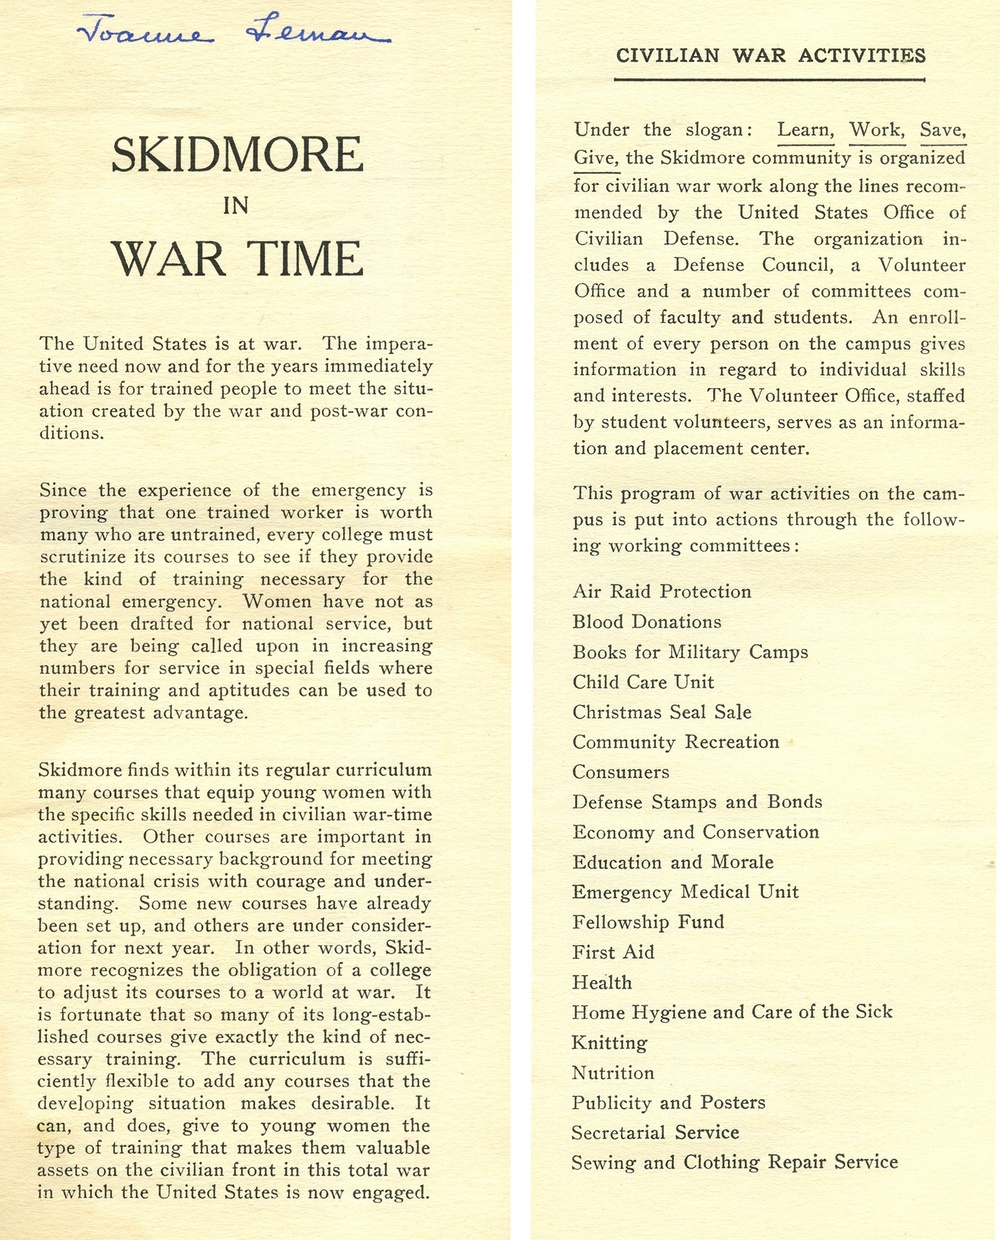 A yellowed page excerpt shows “Skidmore in Wartime” written on the right side in large font, accompanied by smaller text. In the top center, there is a signature in blue ink.